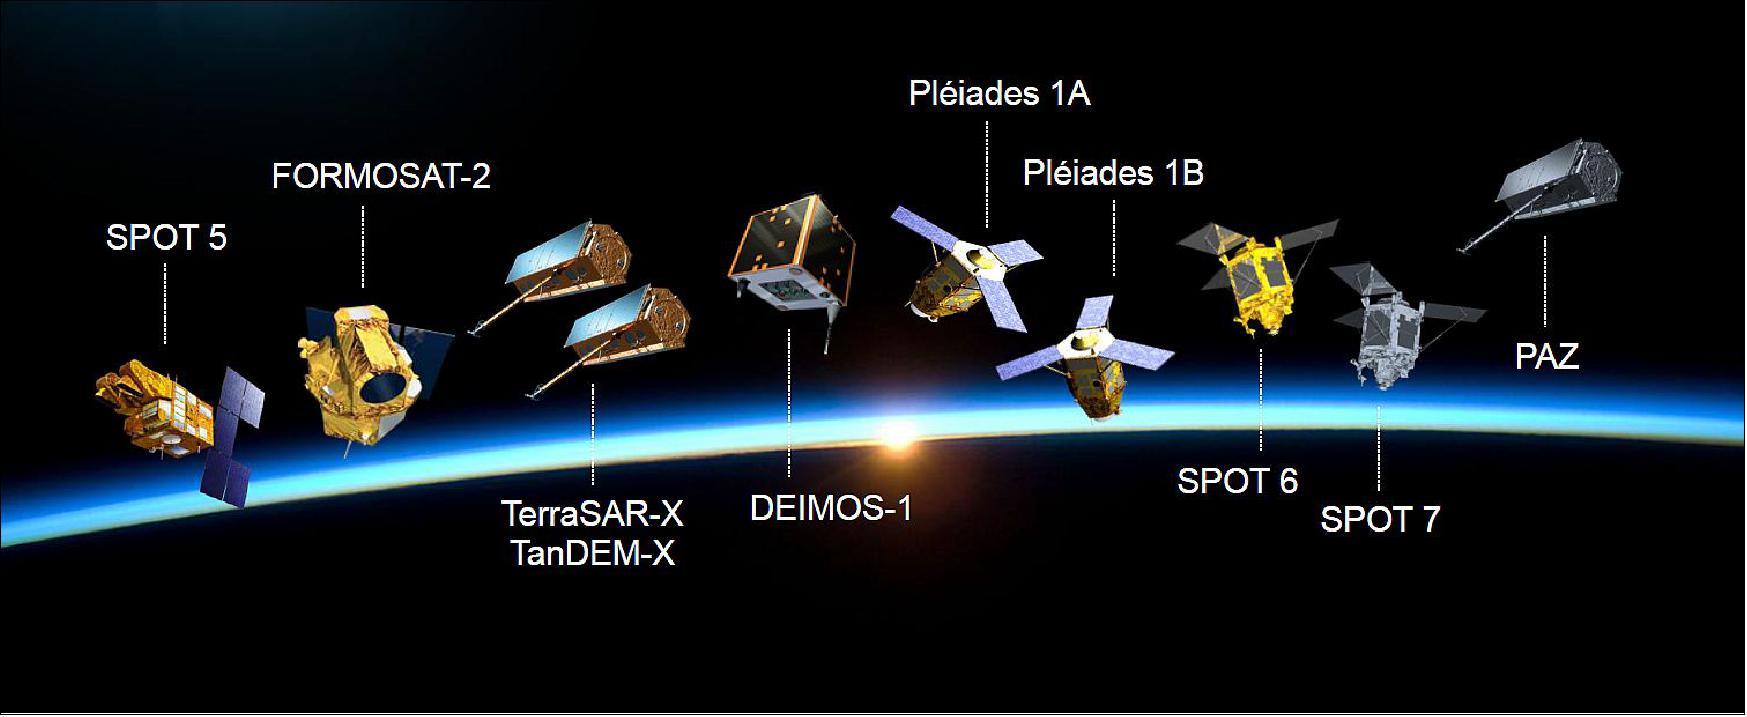 Figure 24: Spacecraft fleet operated by Airbus Defense and Space (image credit: Airbus Defence and Space)